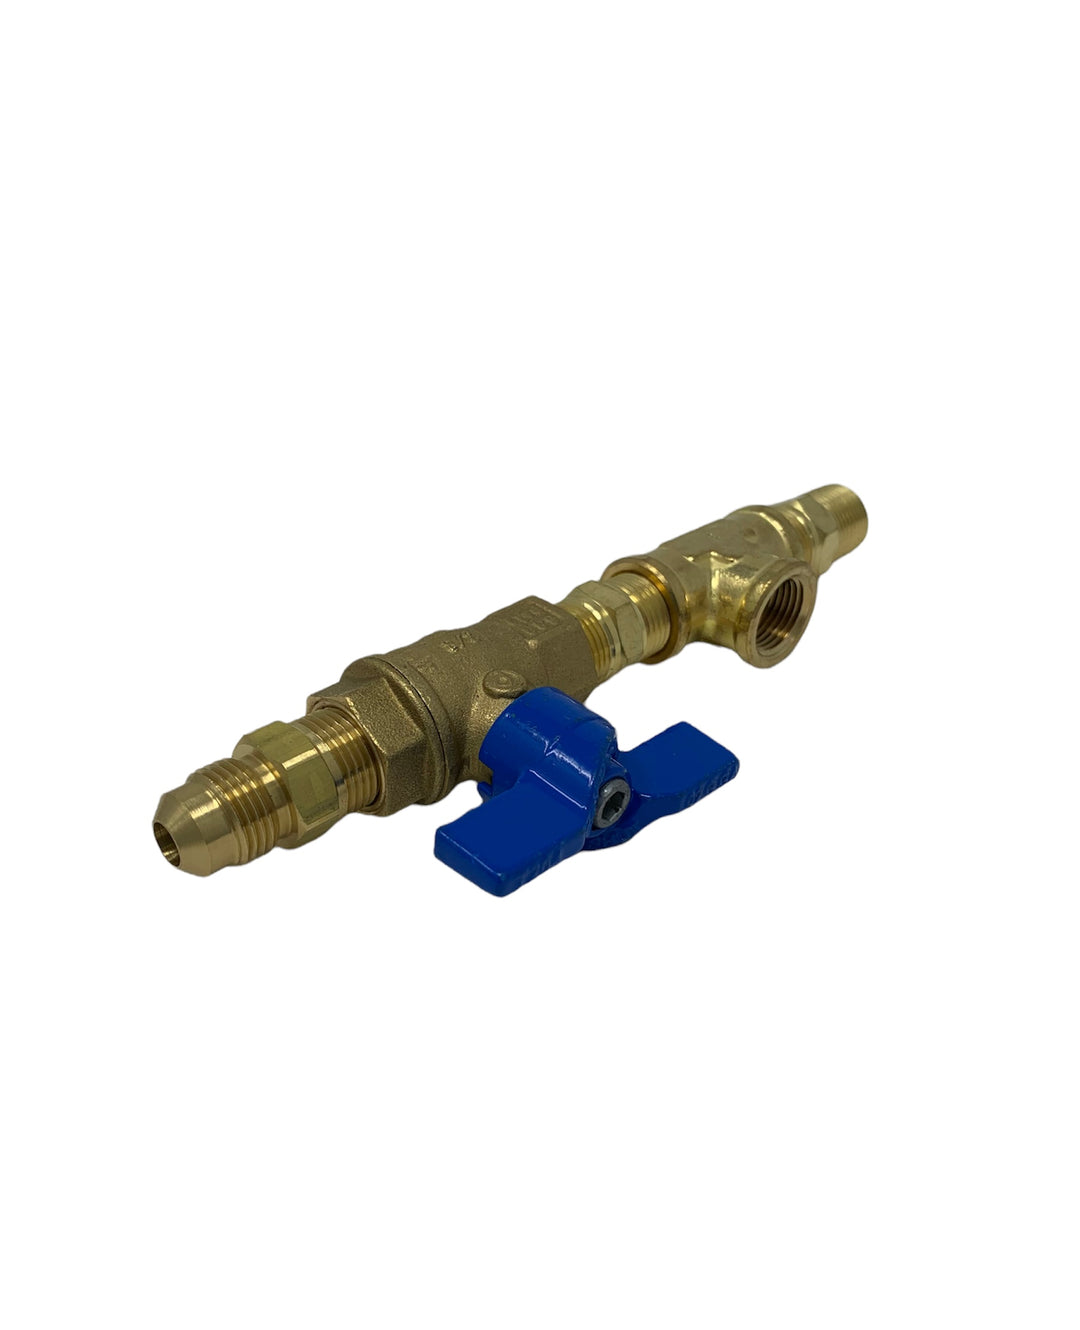 Two-Stage Regulator Fittings - 3rd Appliance Add On